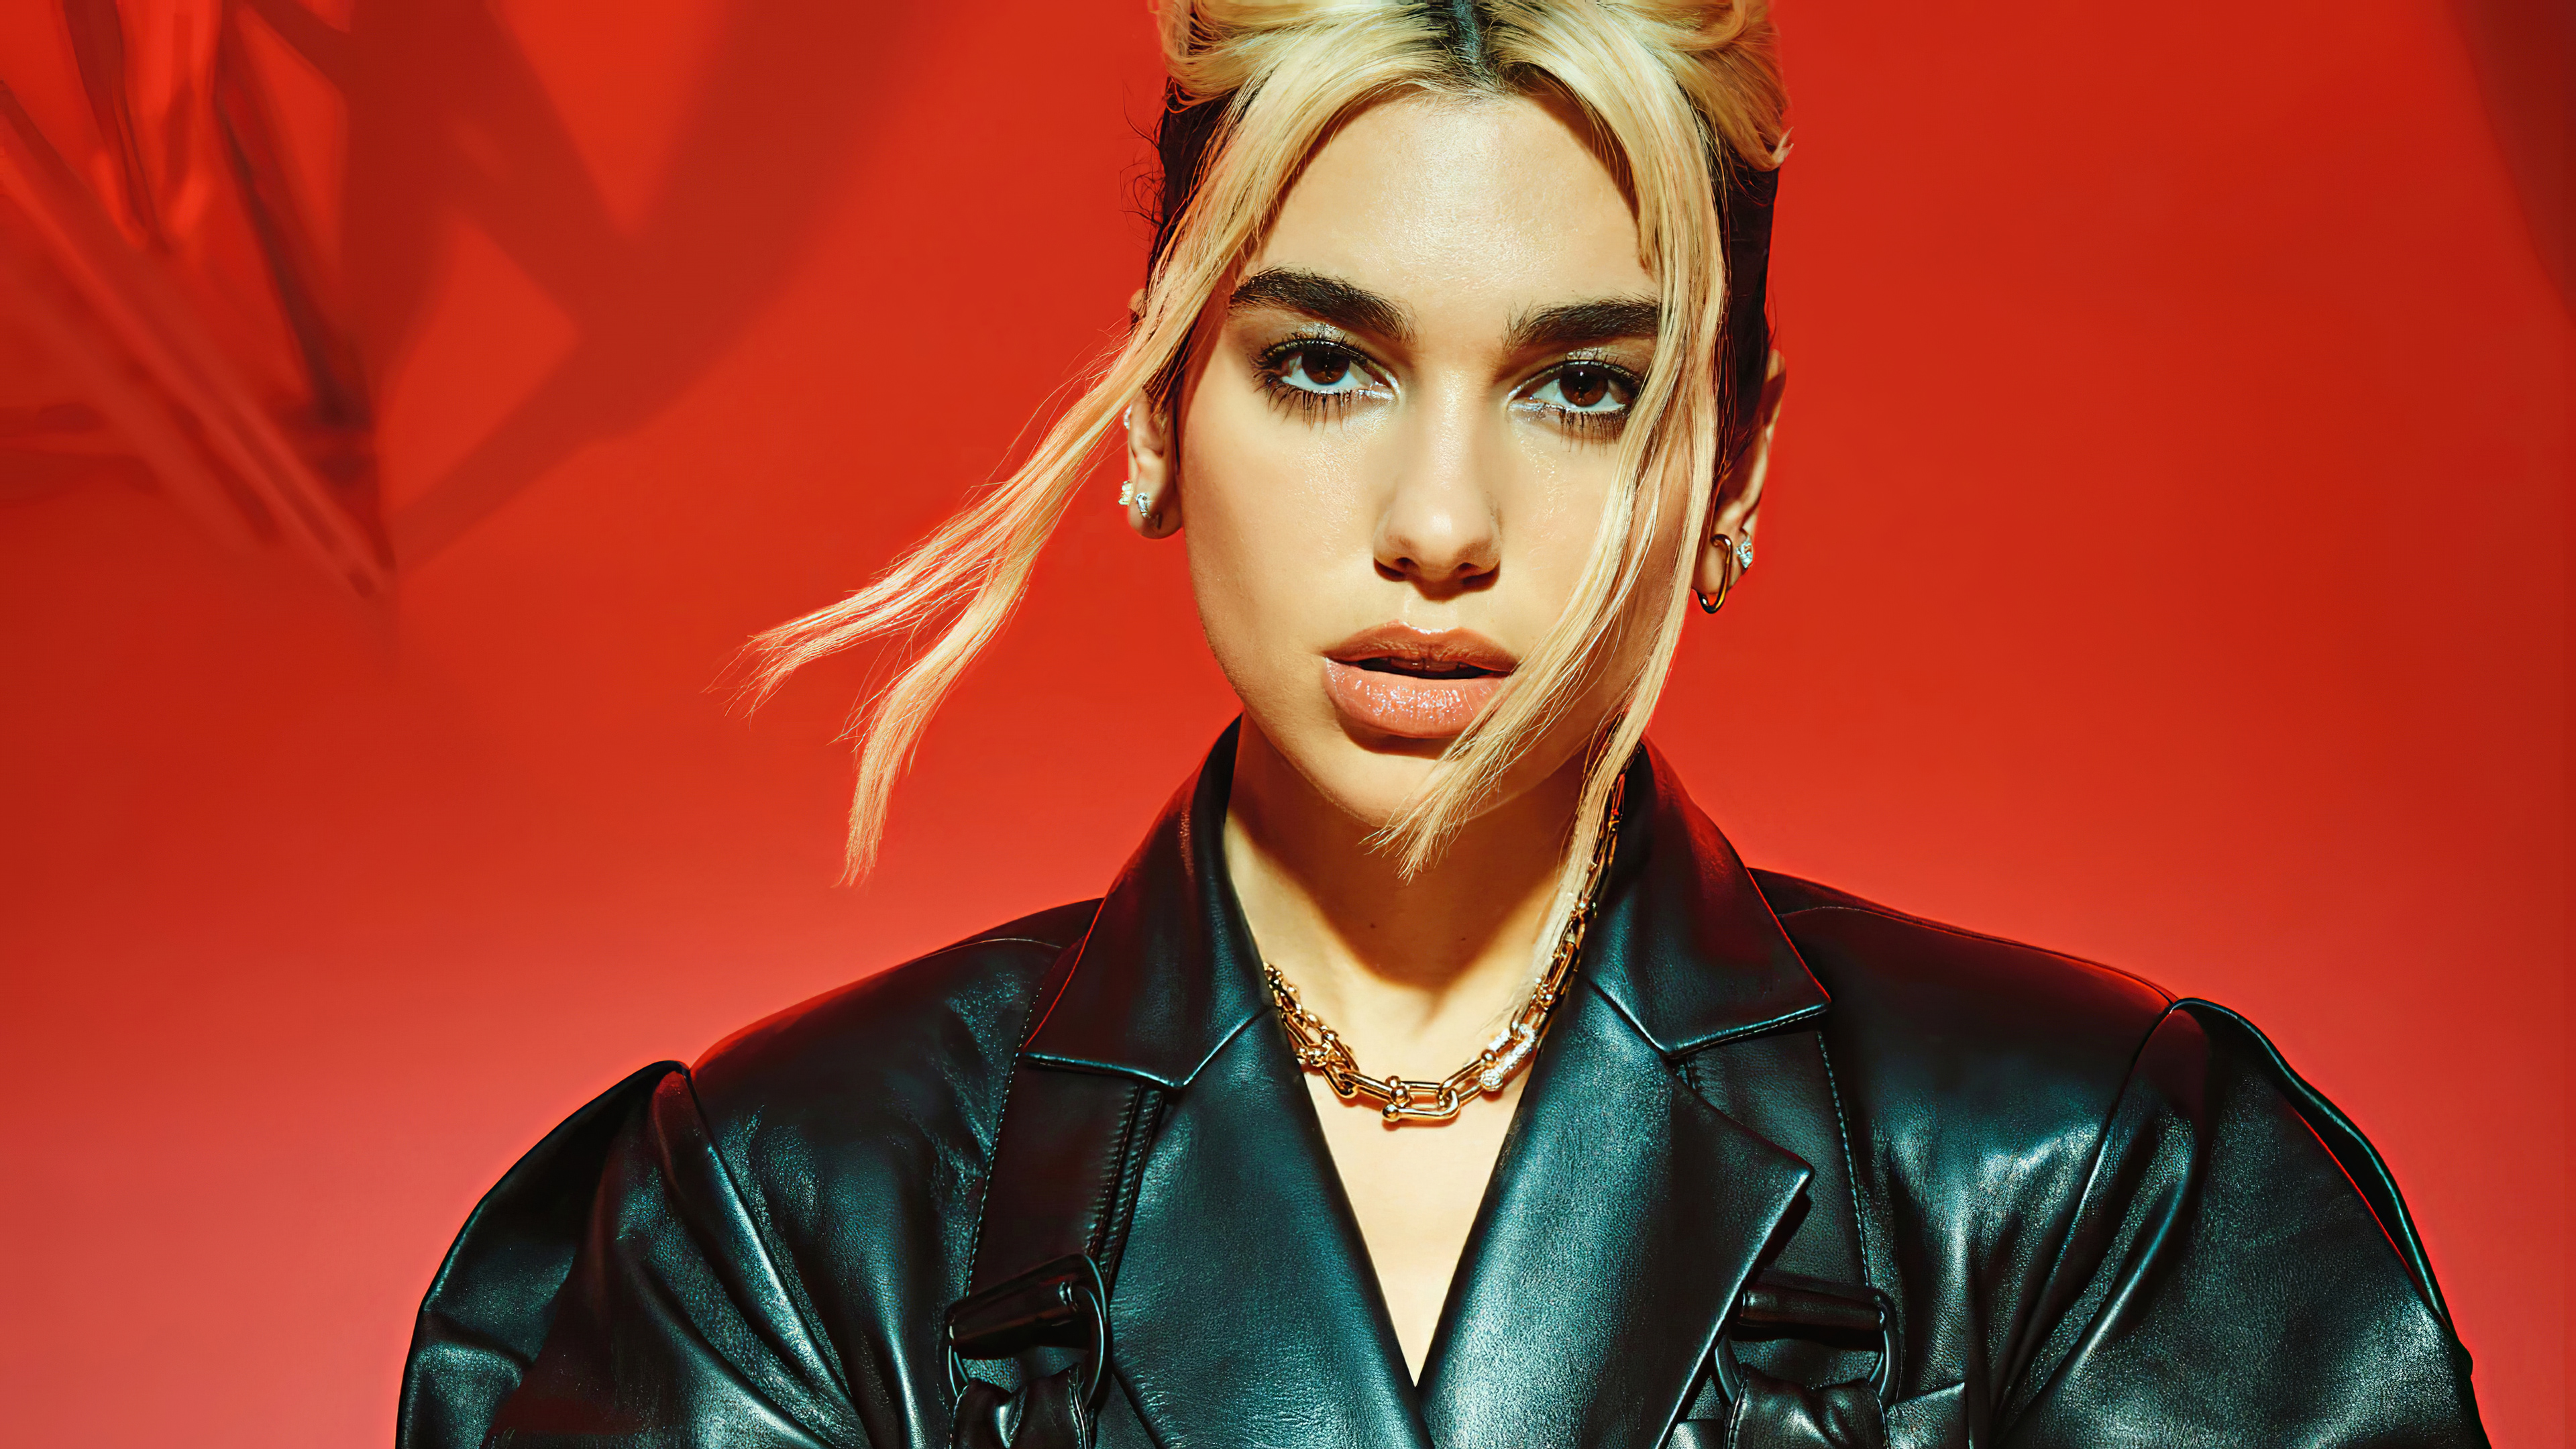 Dua lipa vogue australia k hd celebrities k wallpapers images backgrounds photos and pictures